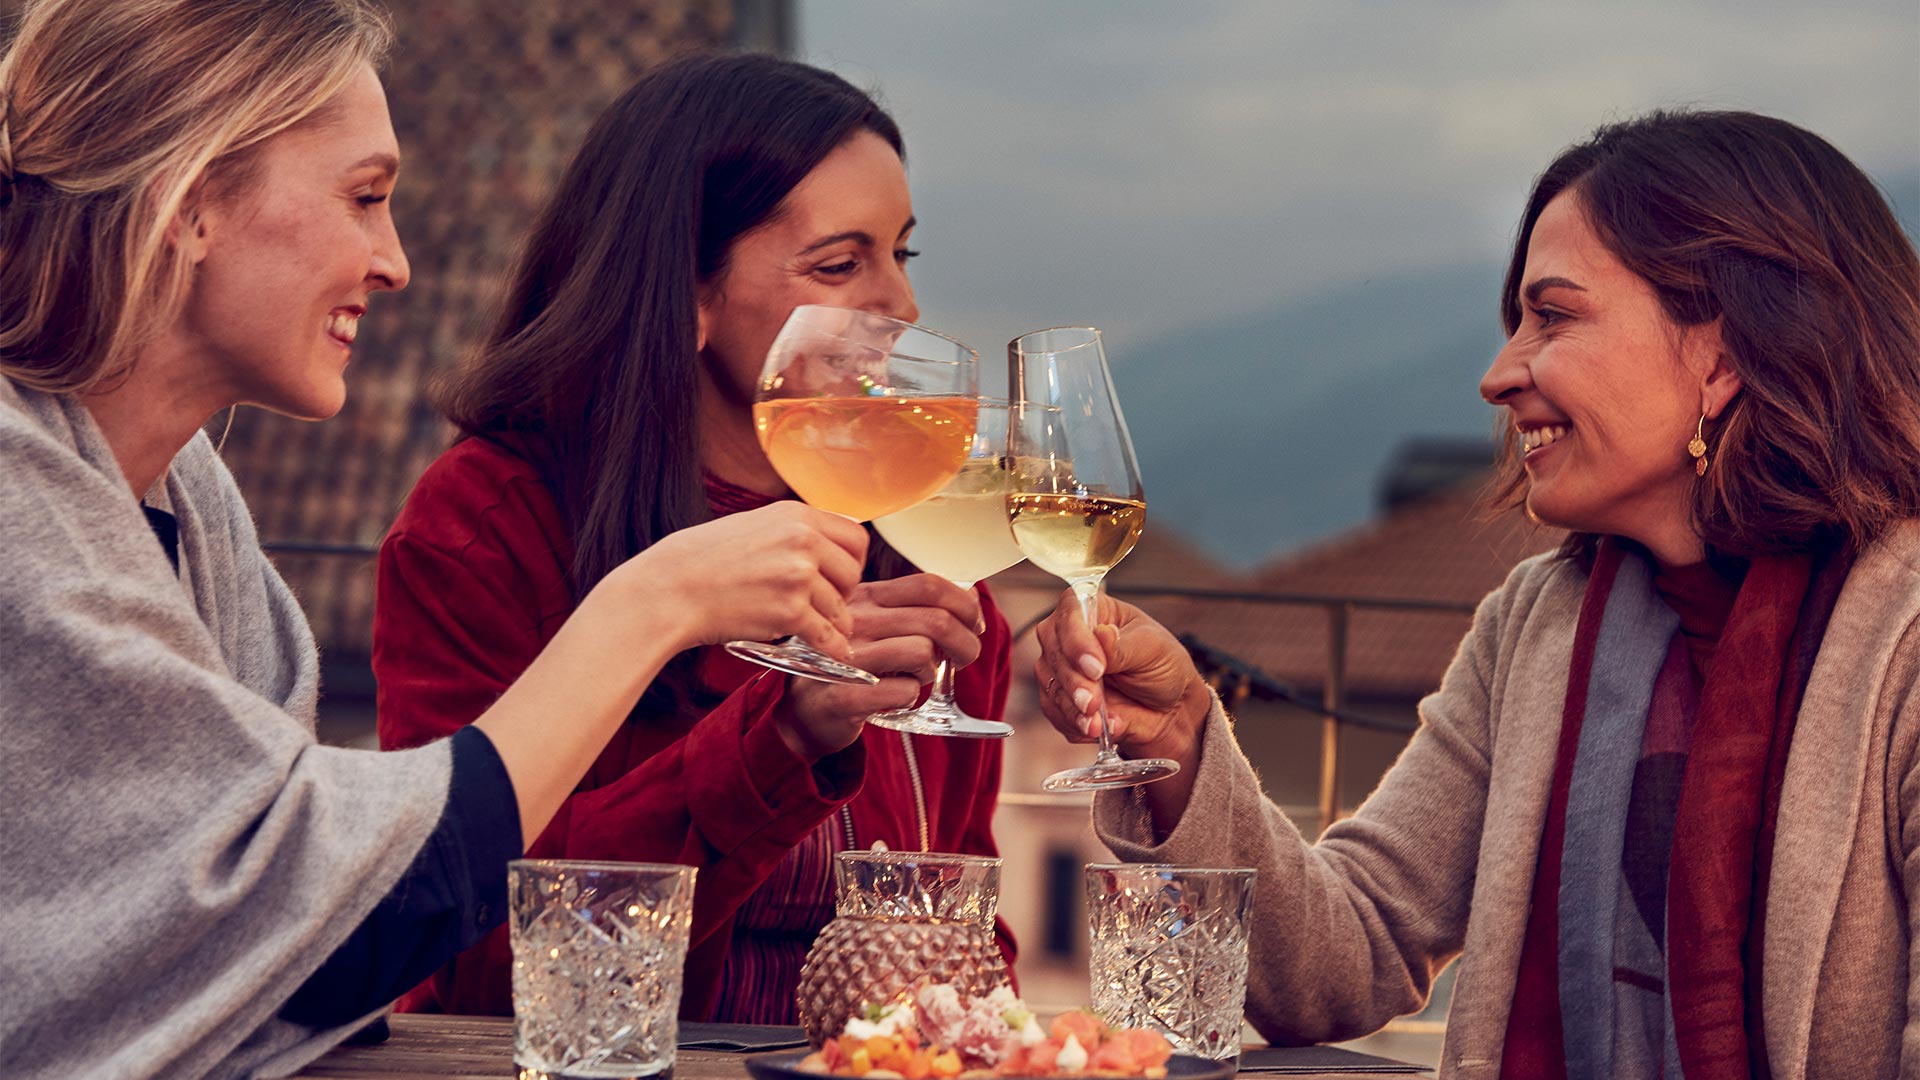 In the evening, three friends sit at a table in an open-air restaurant in Bolzano and toast with glasses of white wine.